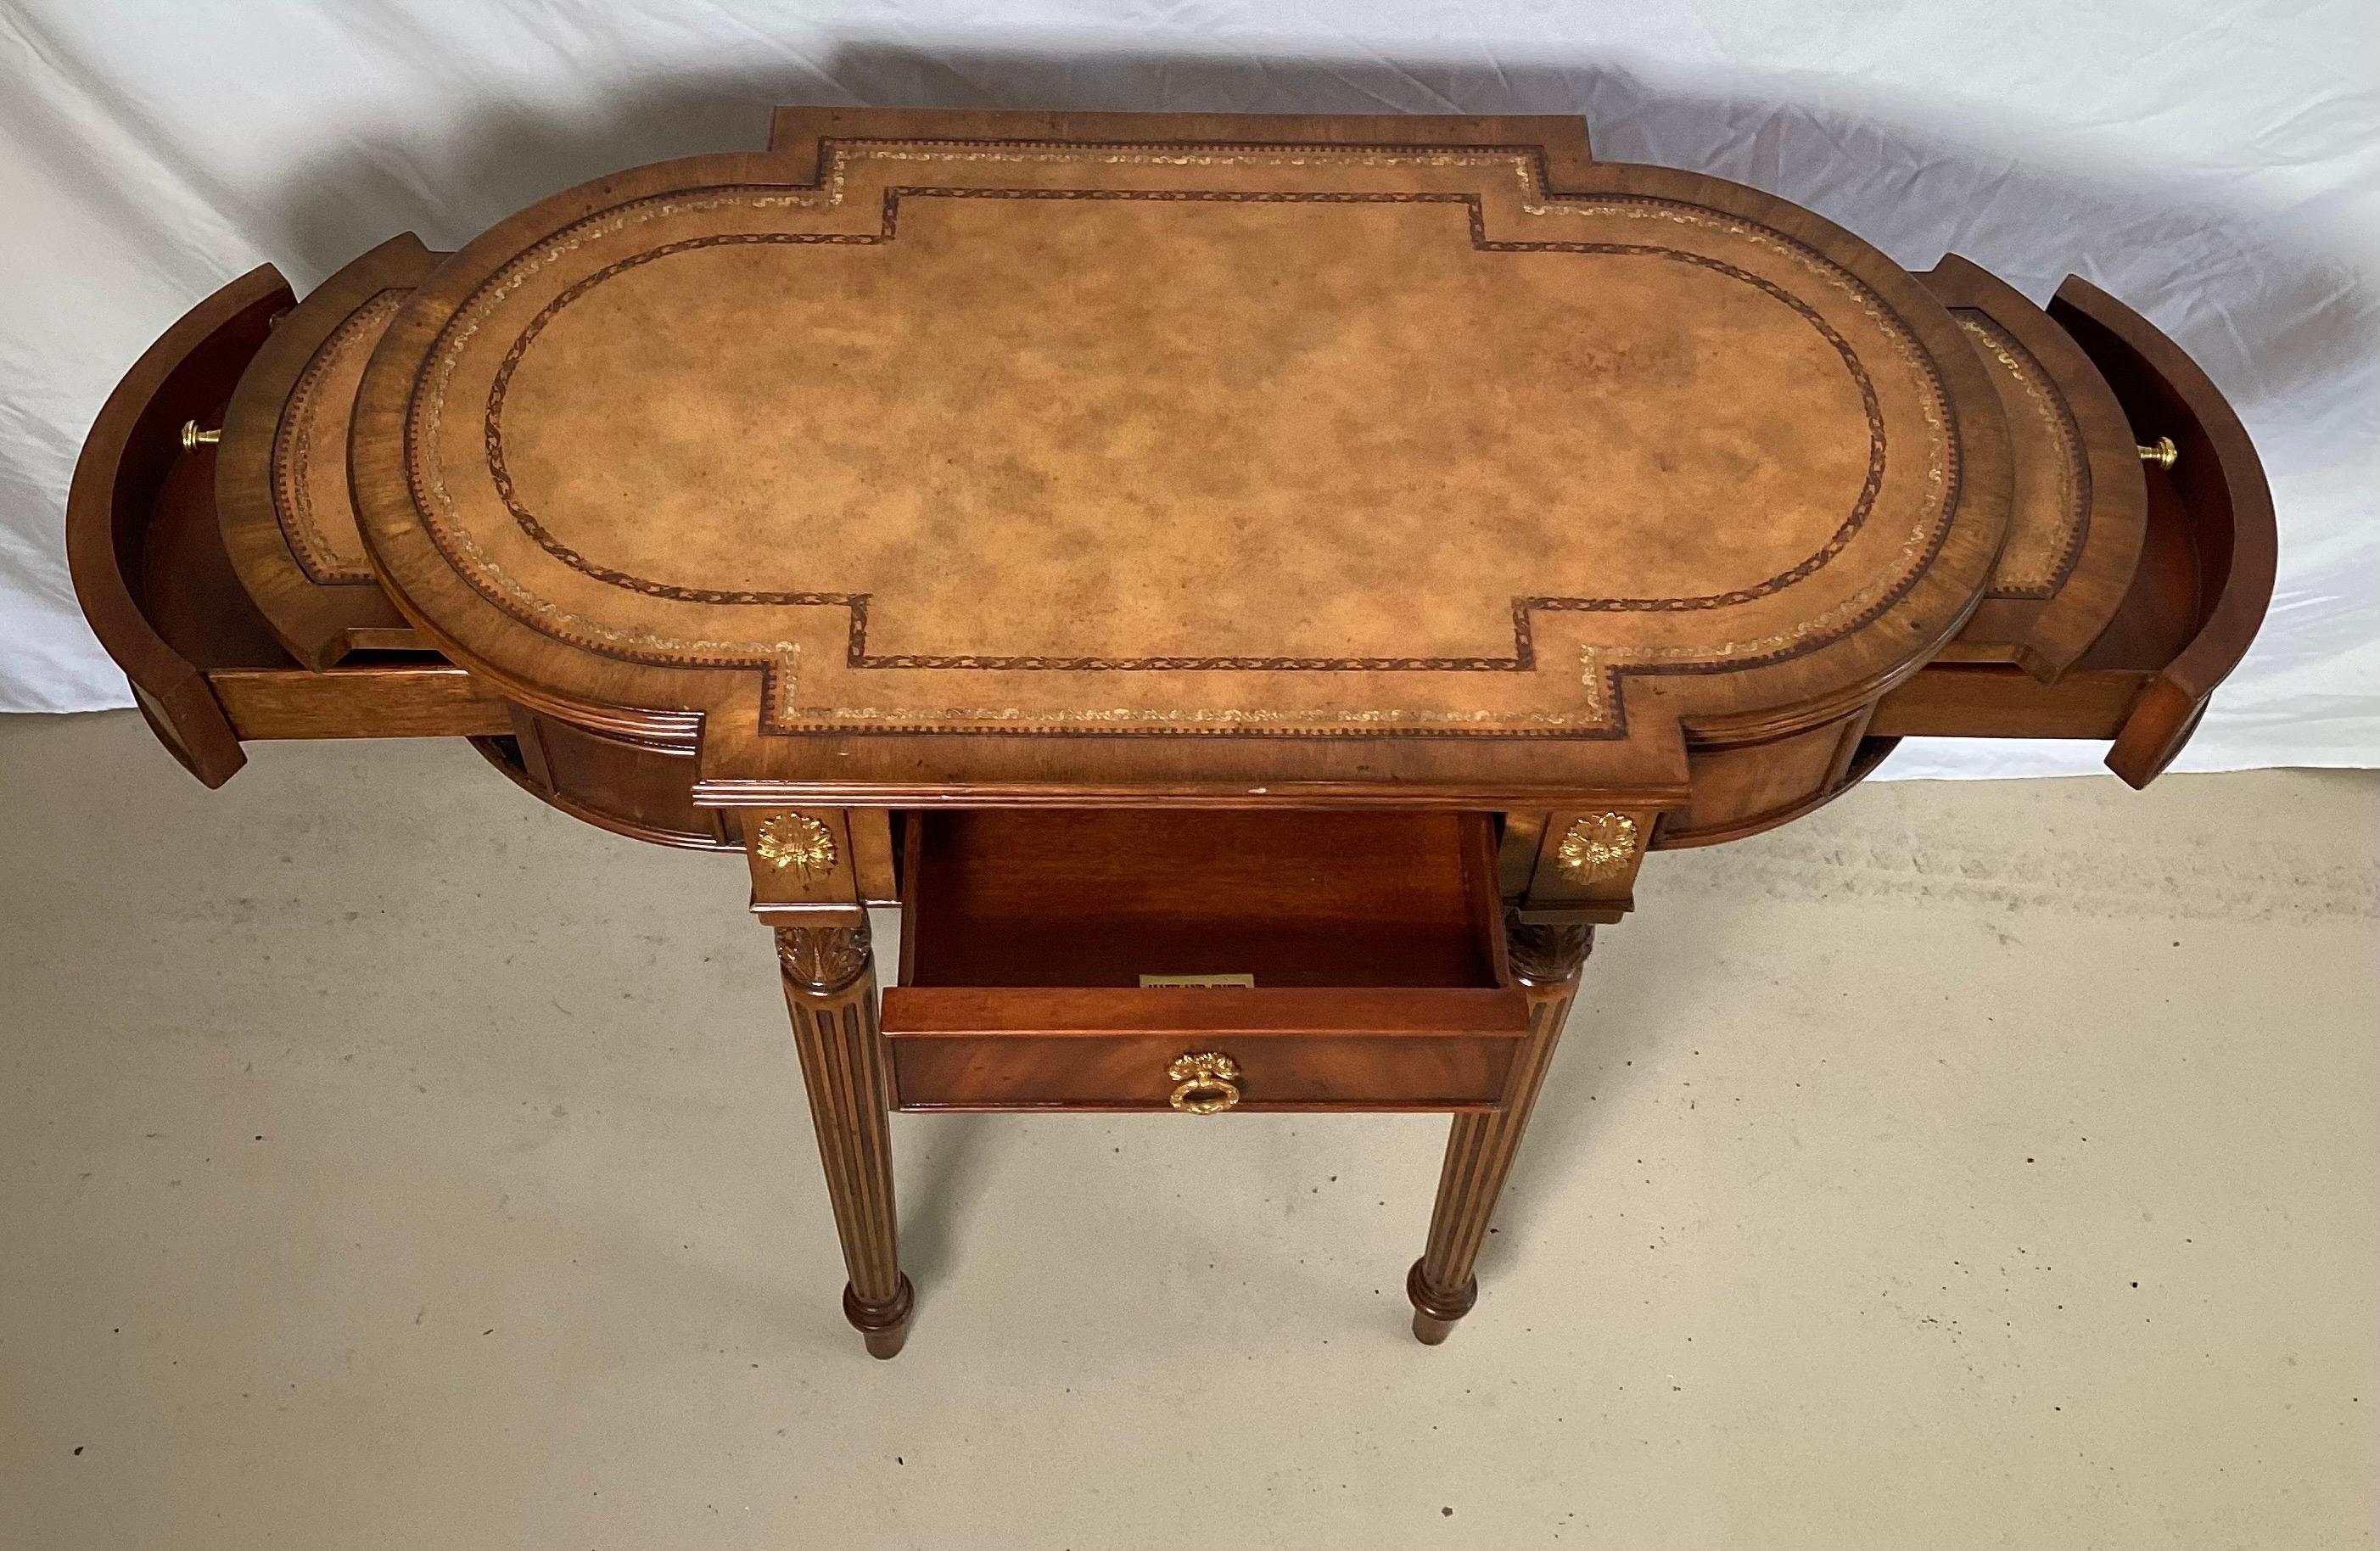 20th Century Oval Walnut and Mahogany Accent Work Table with Leather Top by Maitland Smith